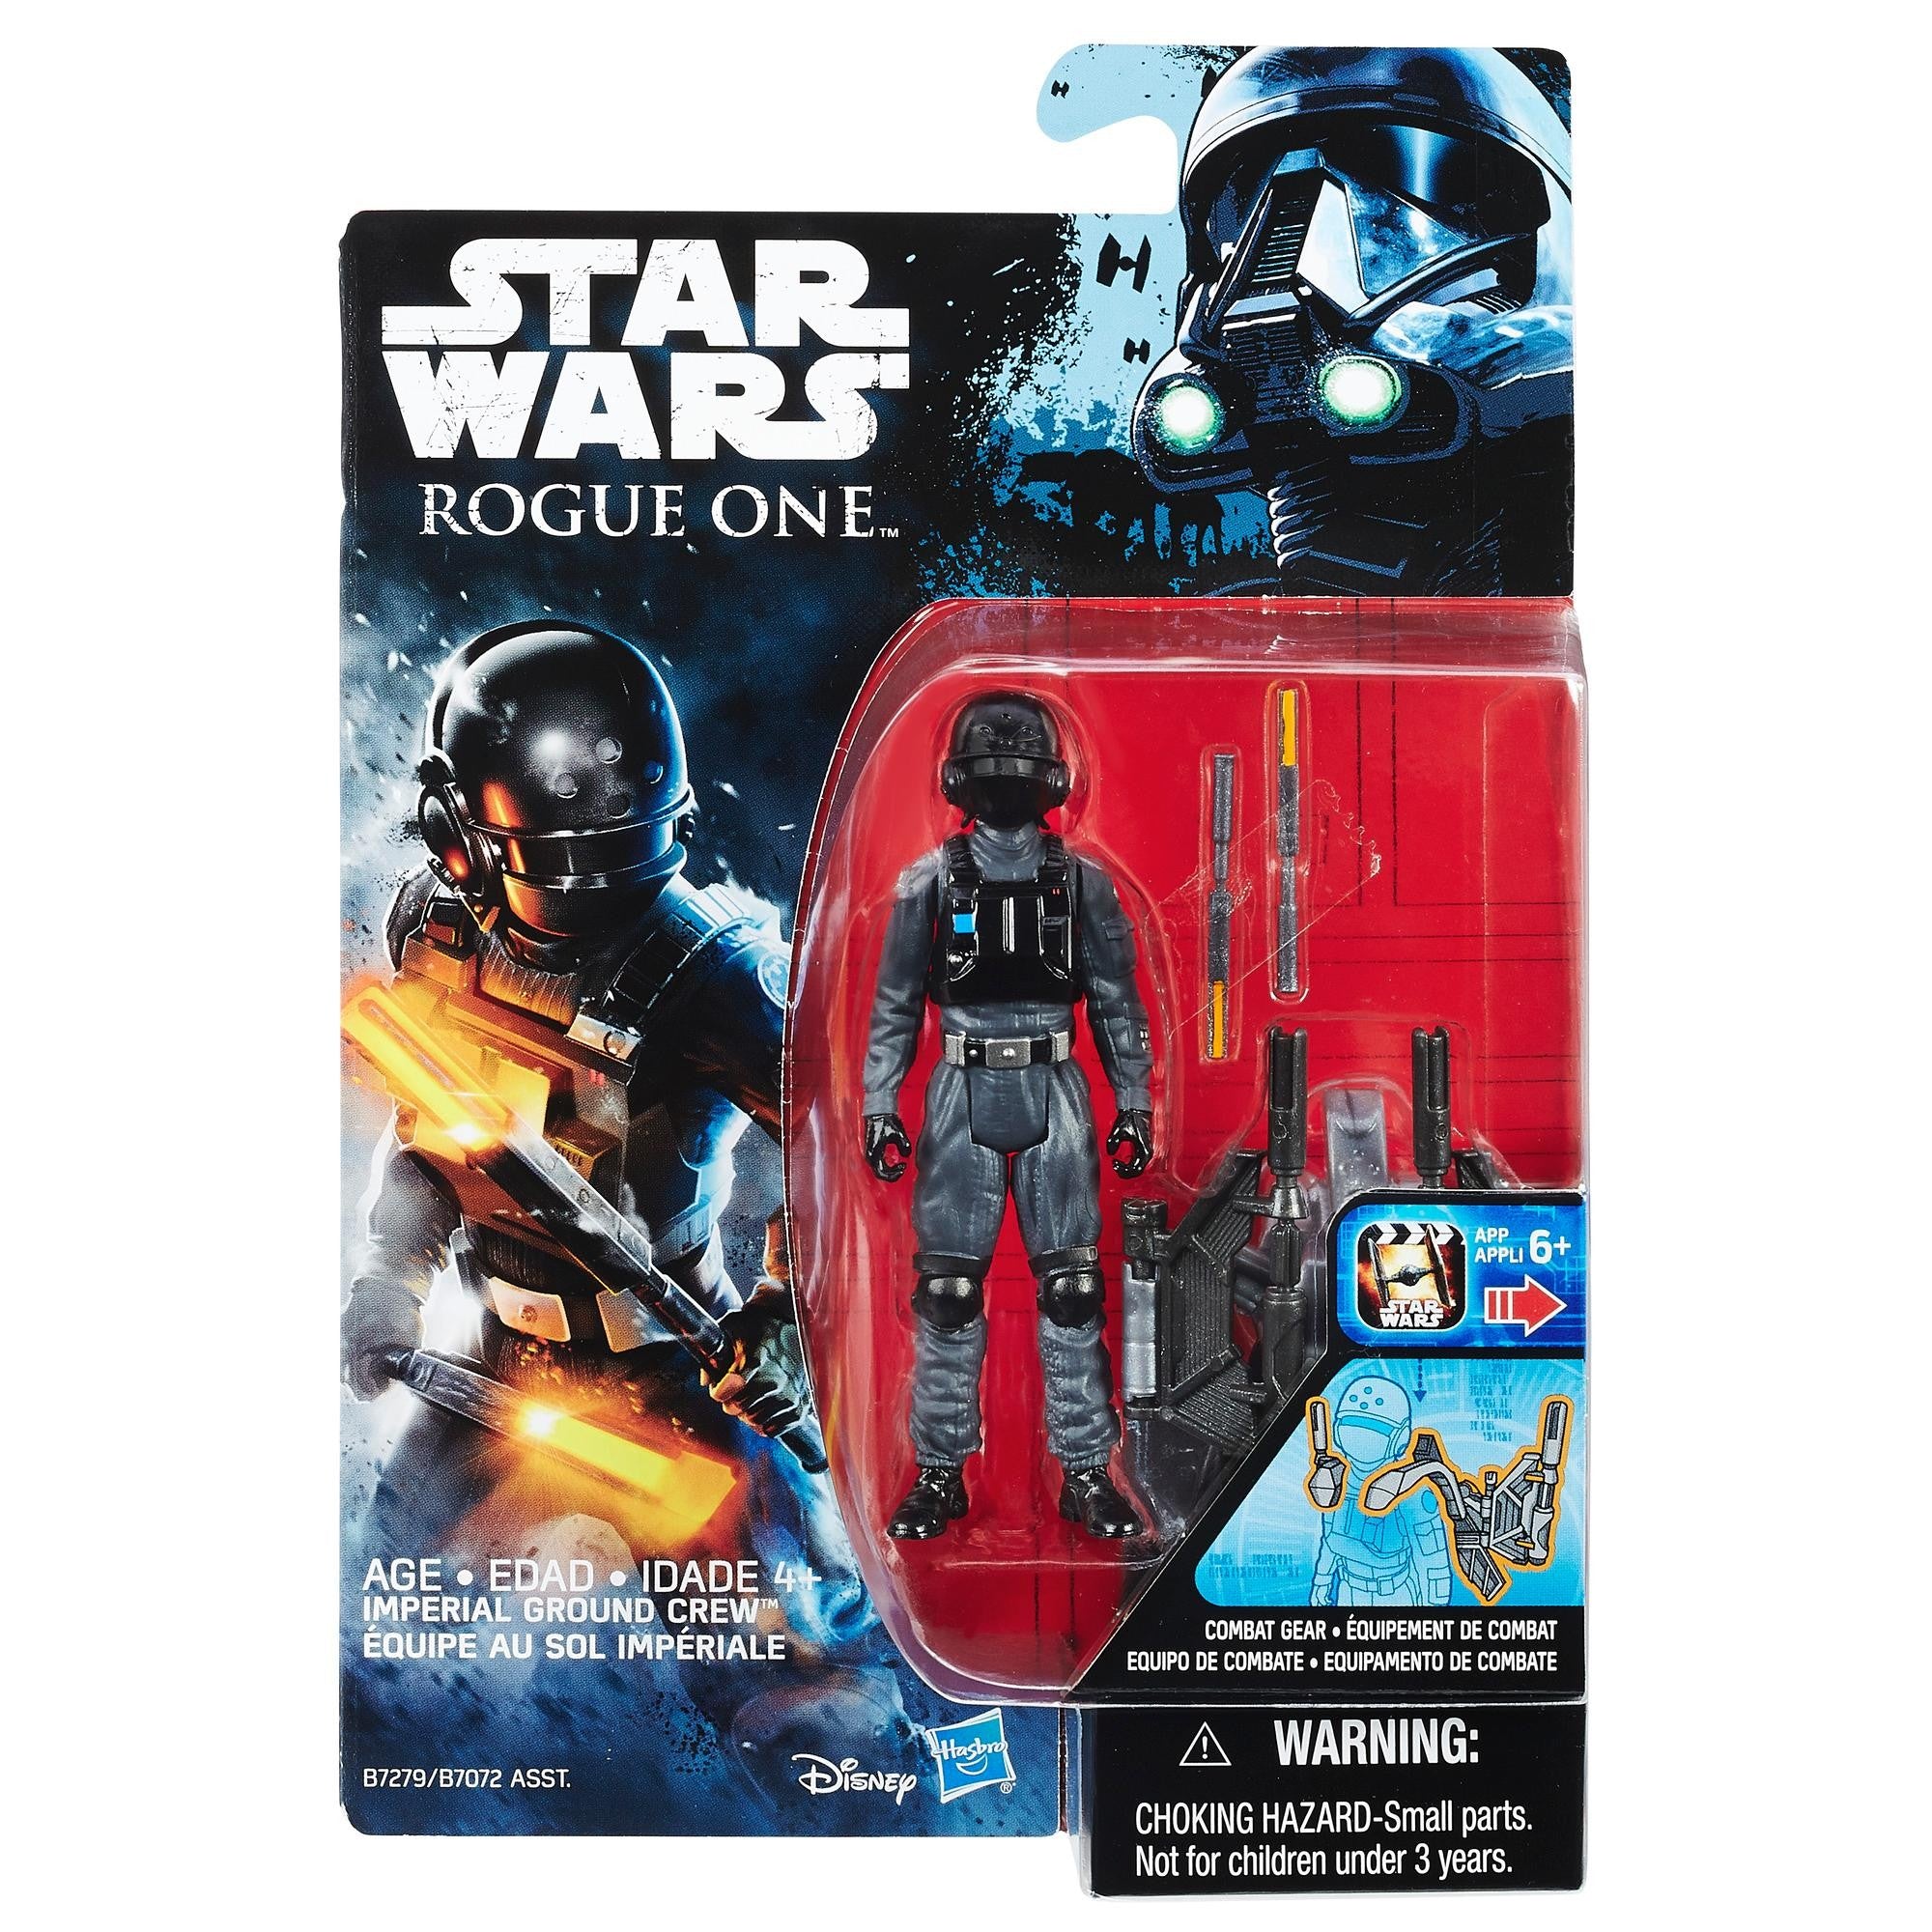 Star Wars Rogue One 3.75" Imperial Ground Crew